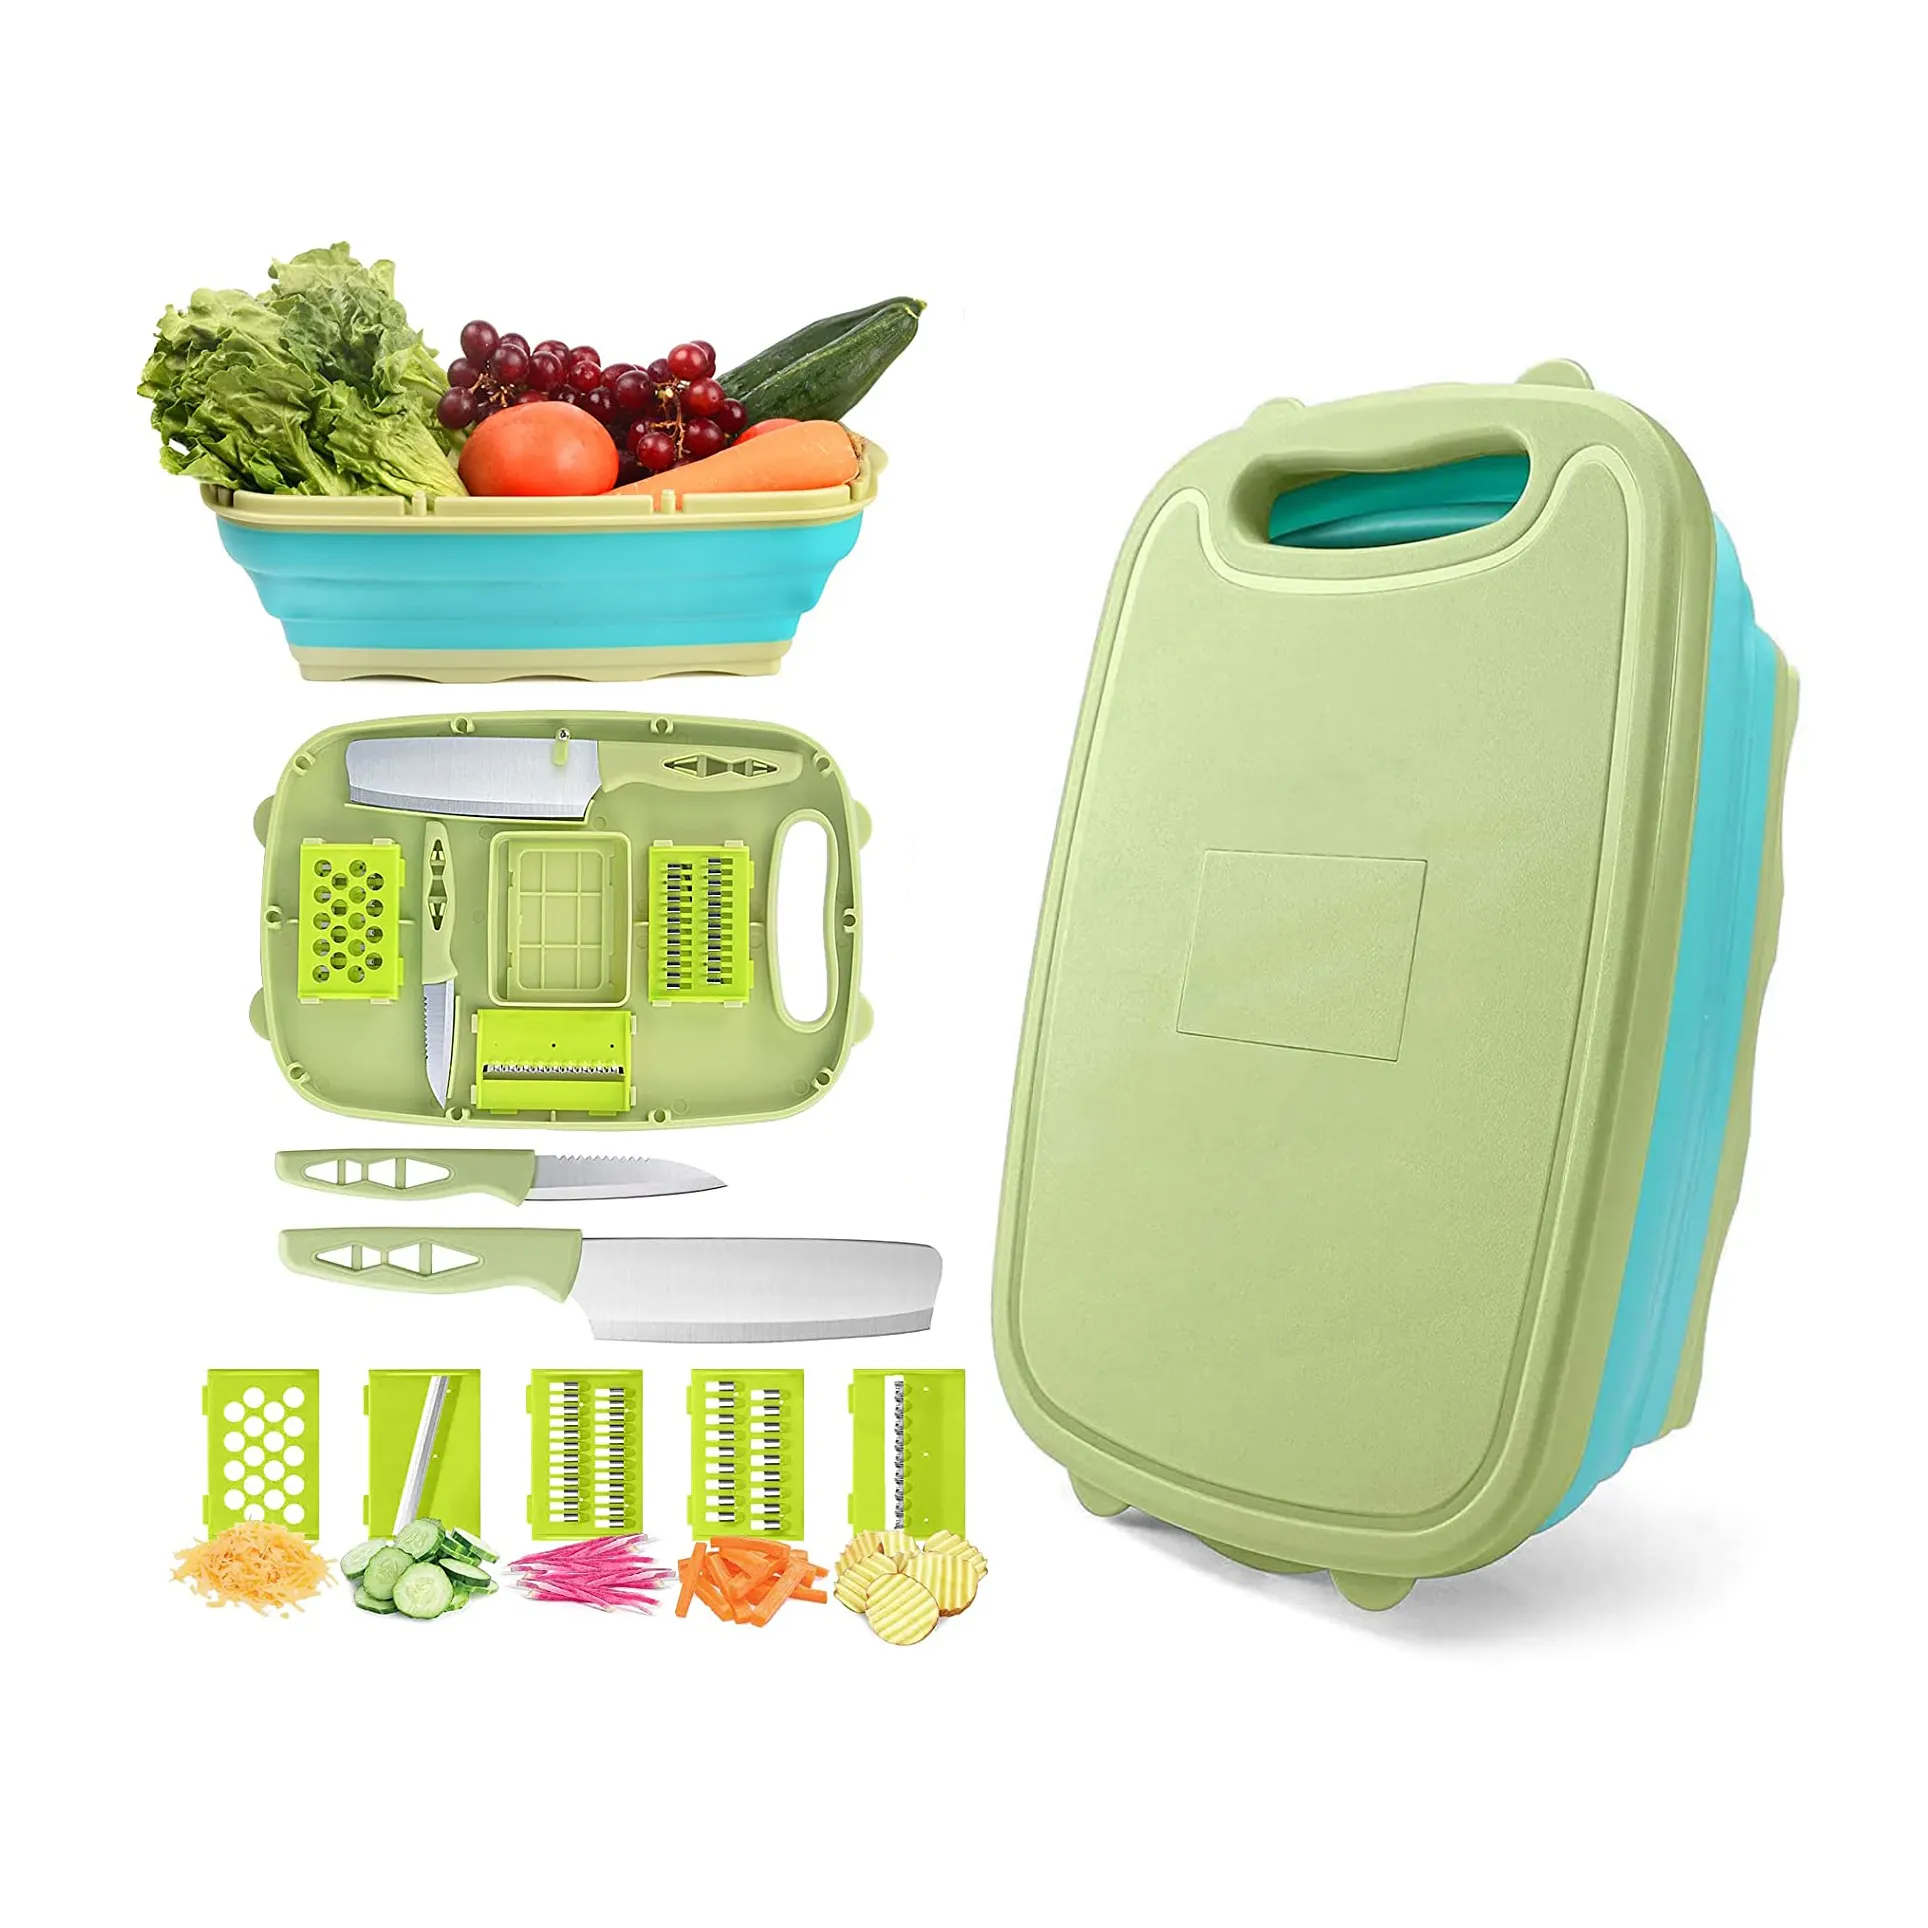 Collapsible Cutting Board, Foldable Chopping Board with Colander, 9In1 Multi Chopping Board Vegetable Washing Basket for Camping